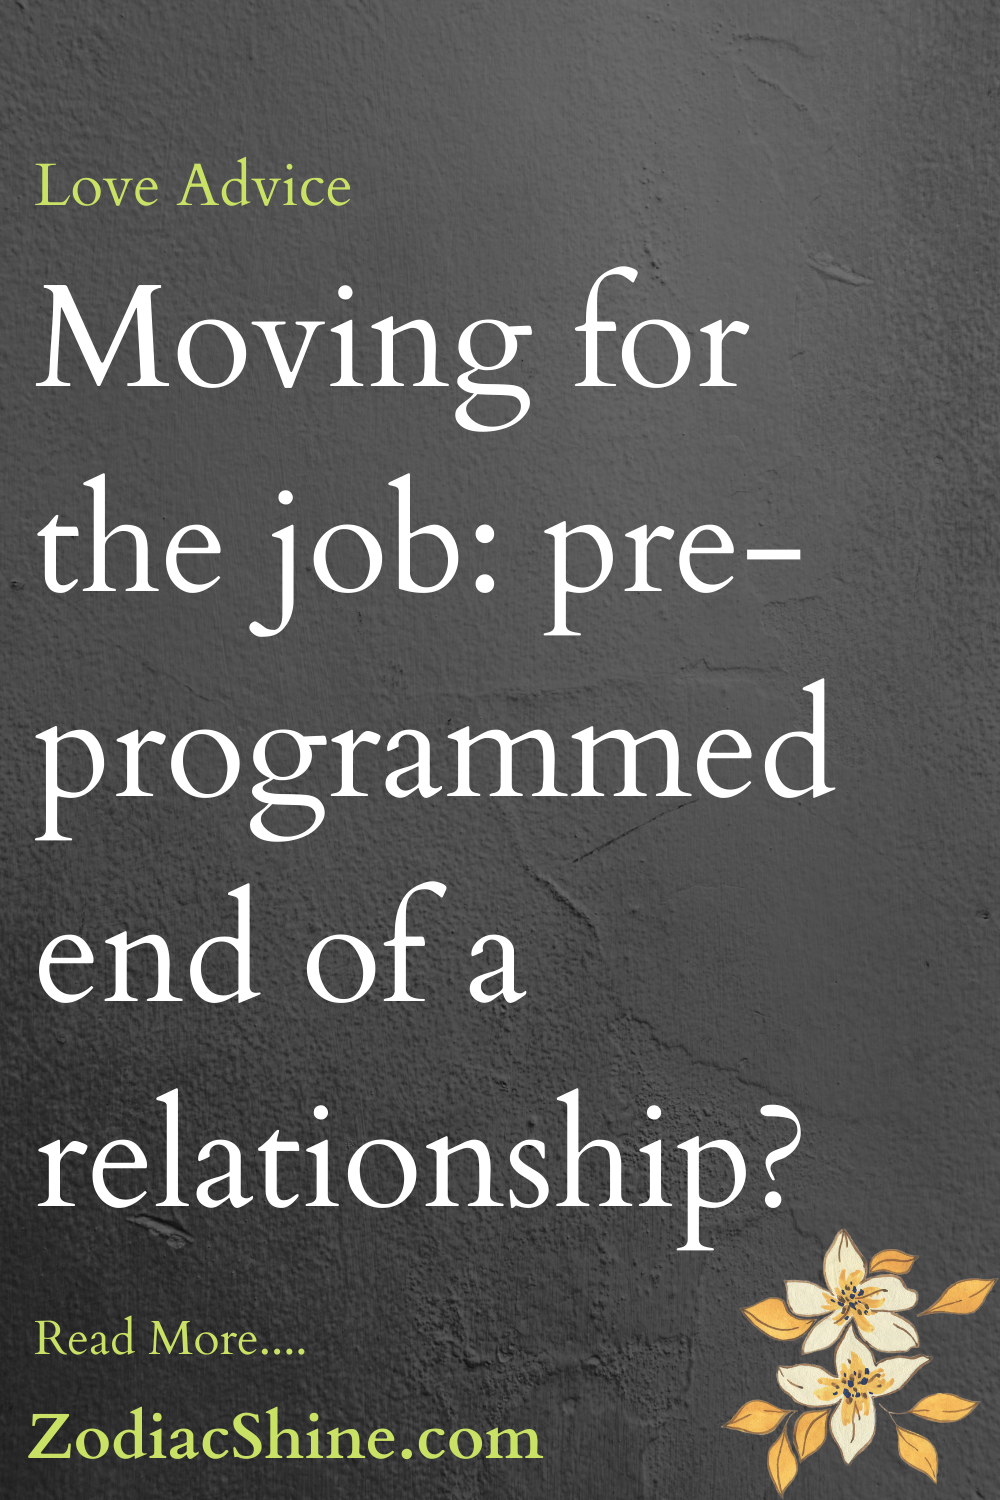 Moving for the job: pre-programmed end of a relationship?